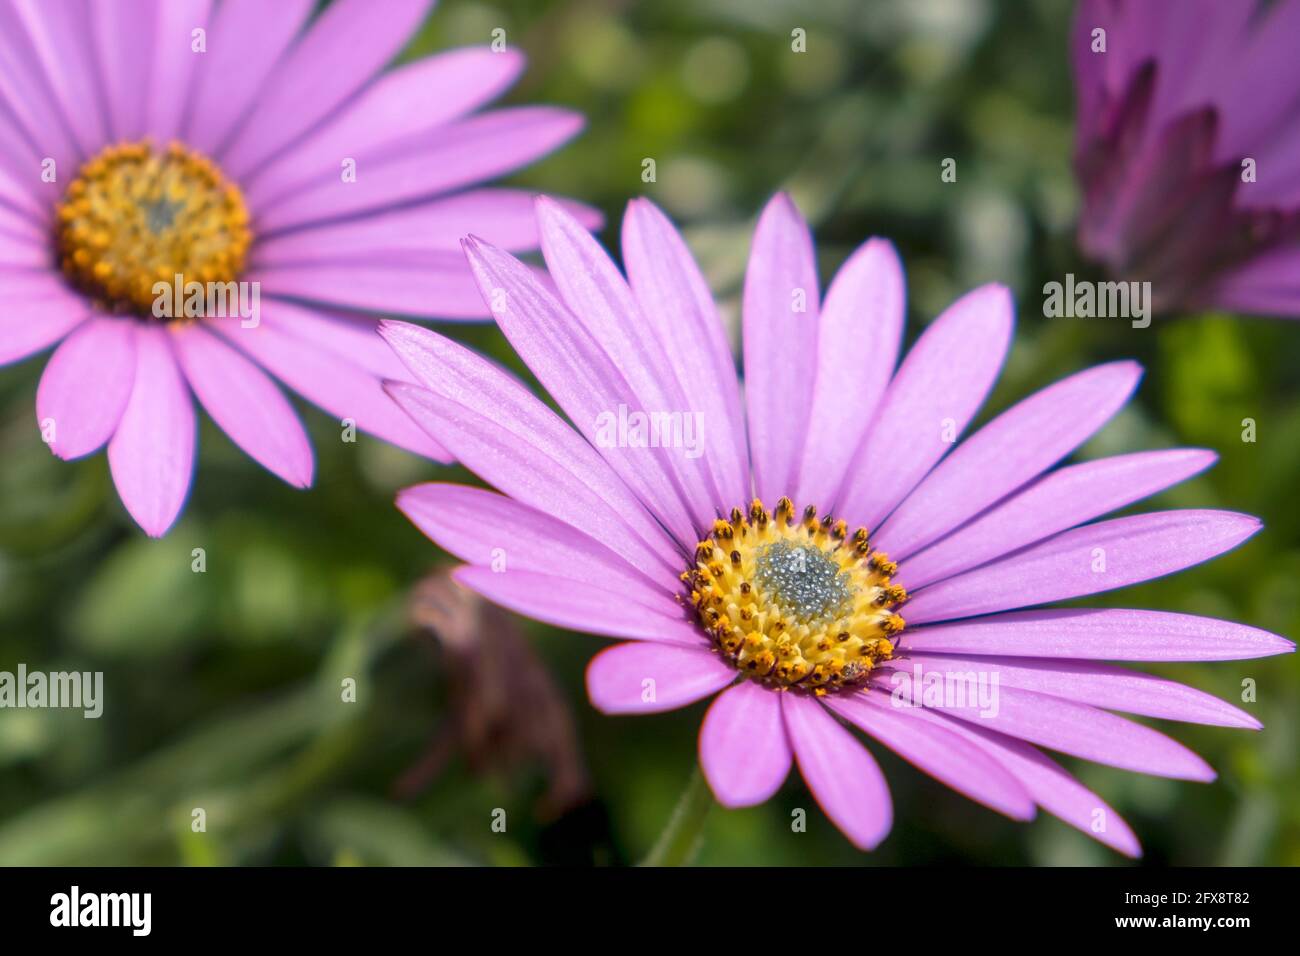 Hardy plant in UK, England, flowers early summer with daisy like flowers and yellow middle Stock Photo